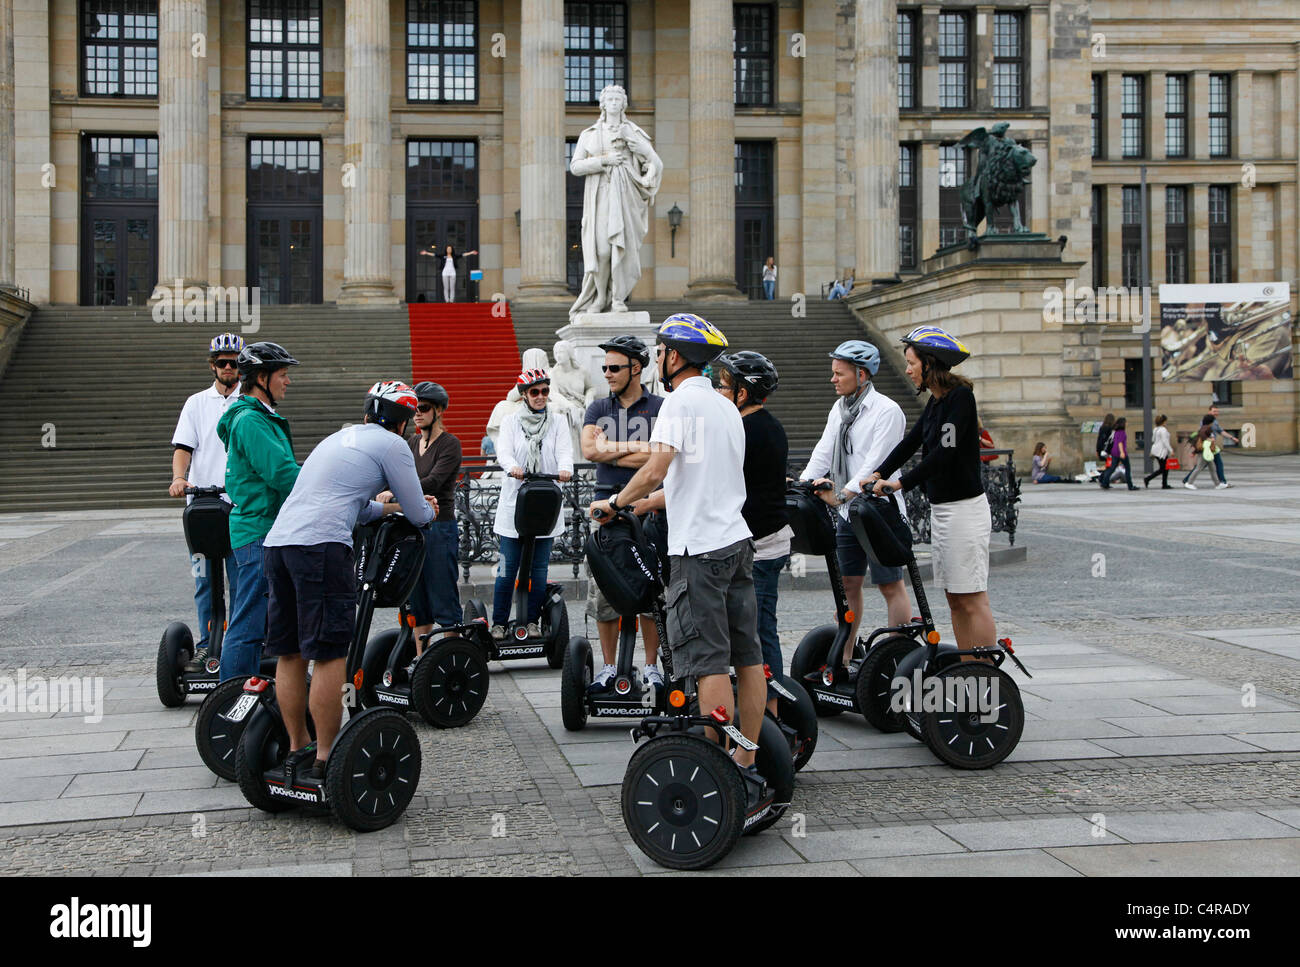 A group of tourists on a Segway two-wheeled, self-balancing personal transporter tour the city in Berlin Germany Stock Photo